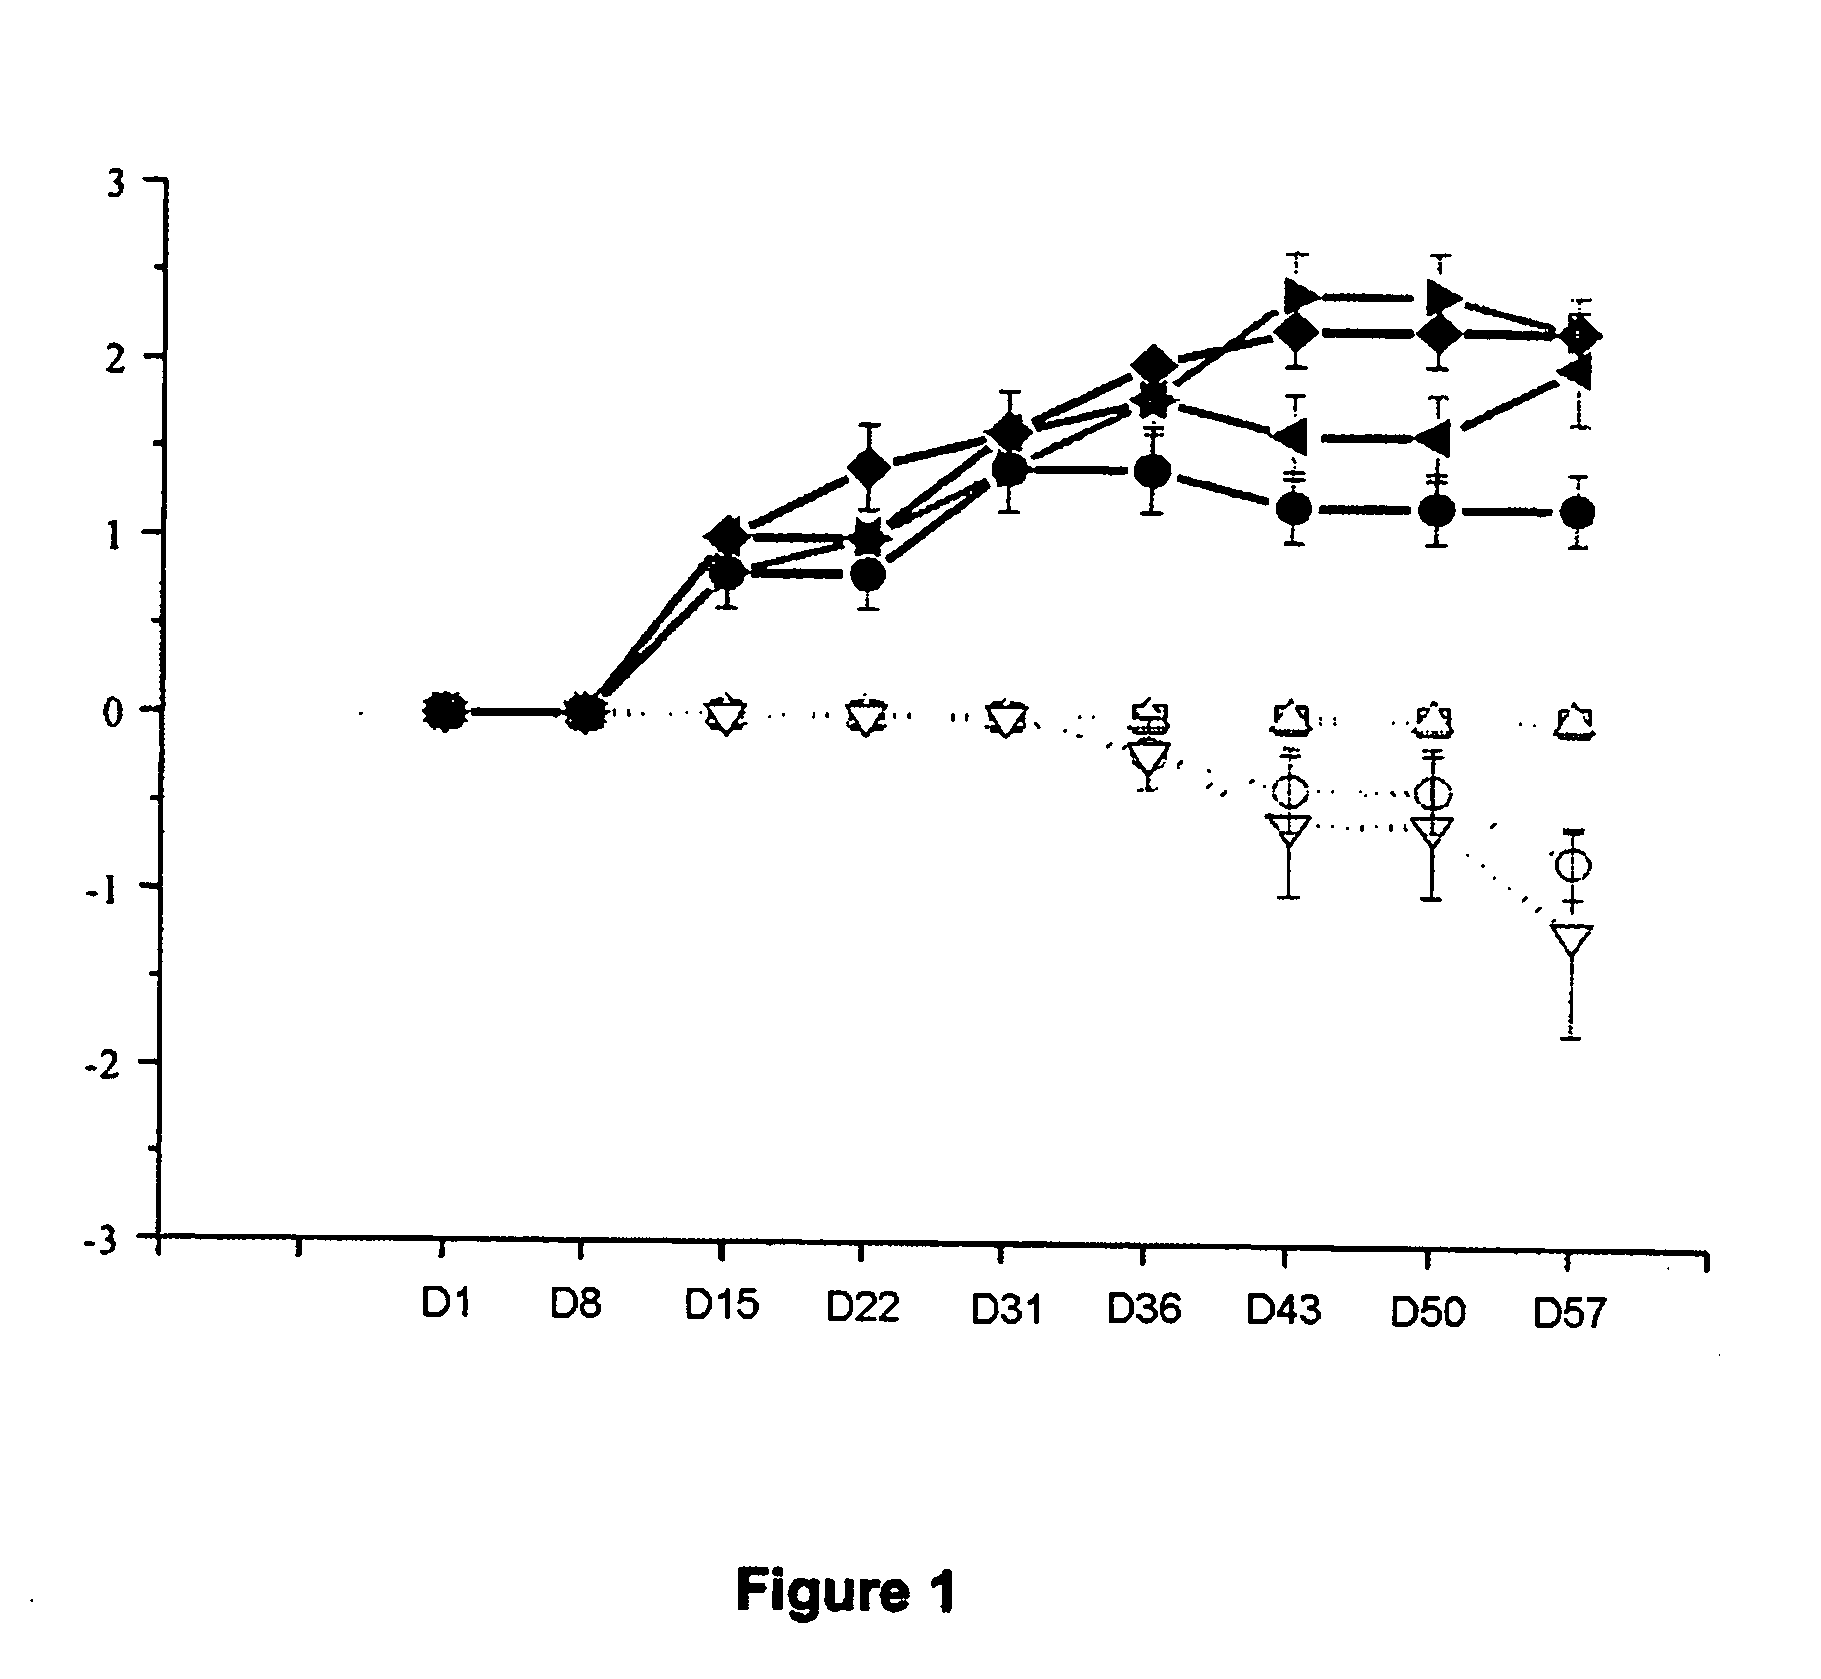 Skin depigmenting compositions comprising adapalene and at least one depigmenting active agent